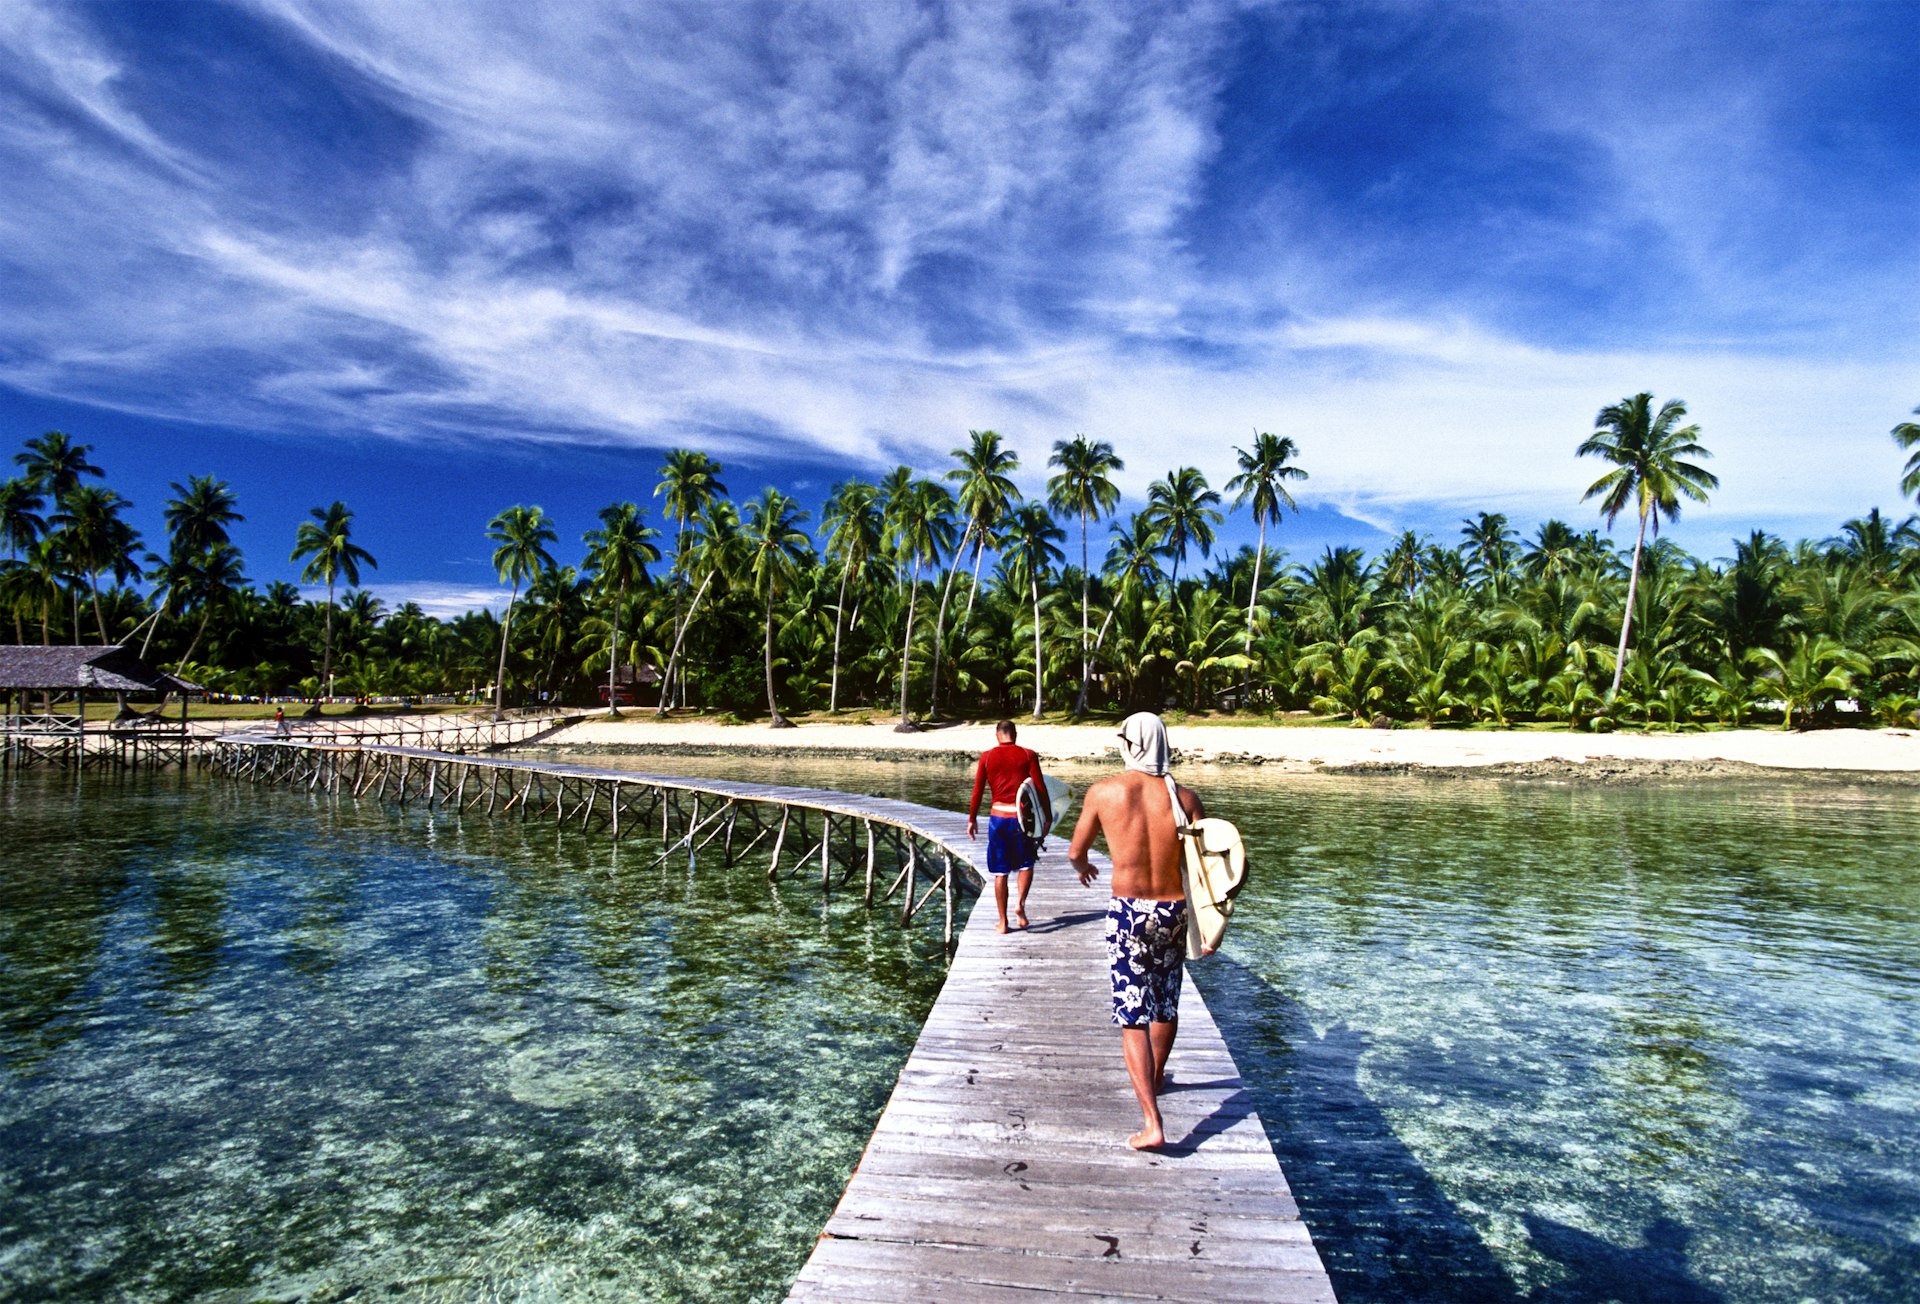 Two surfers walk along a wooden pier on Siargao Island, the Philippines